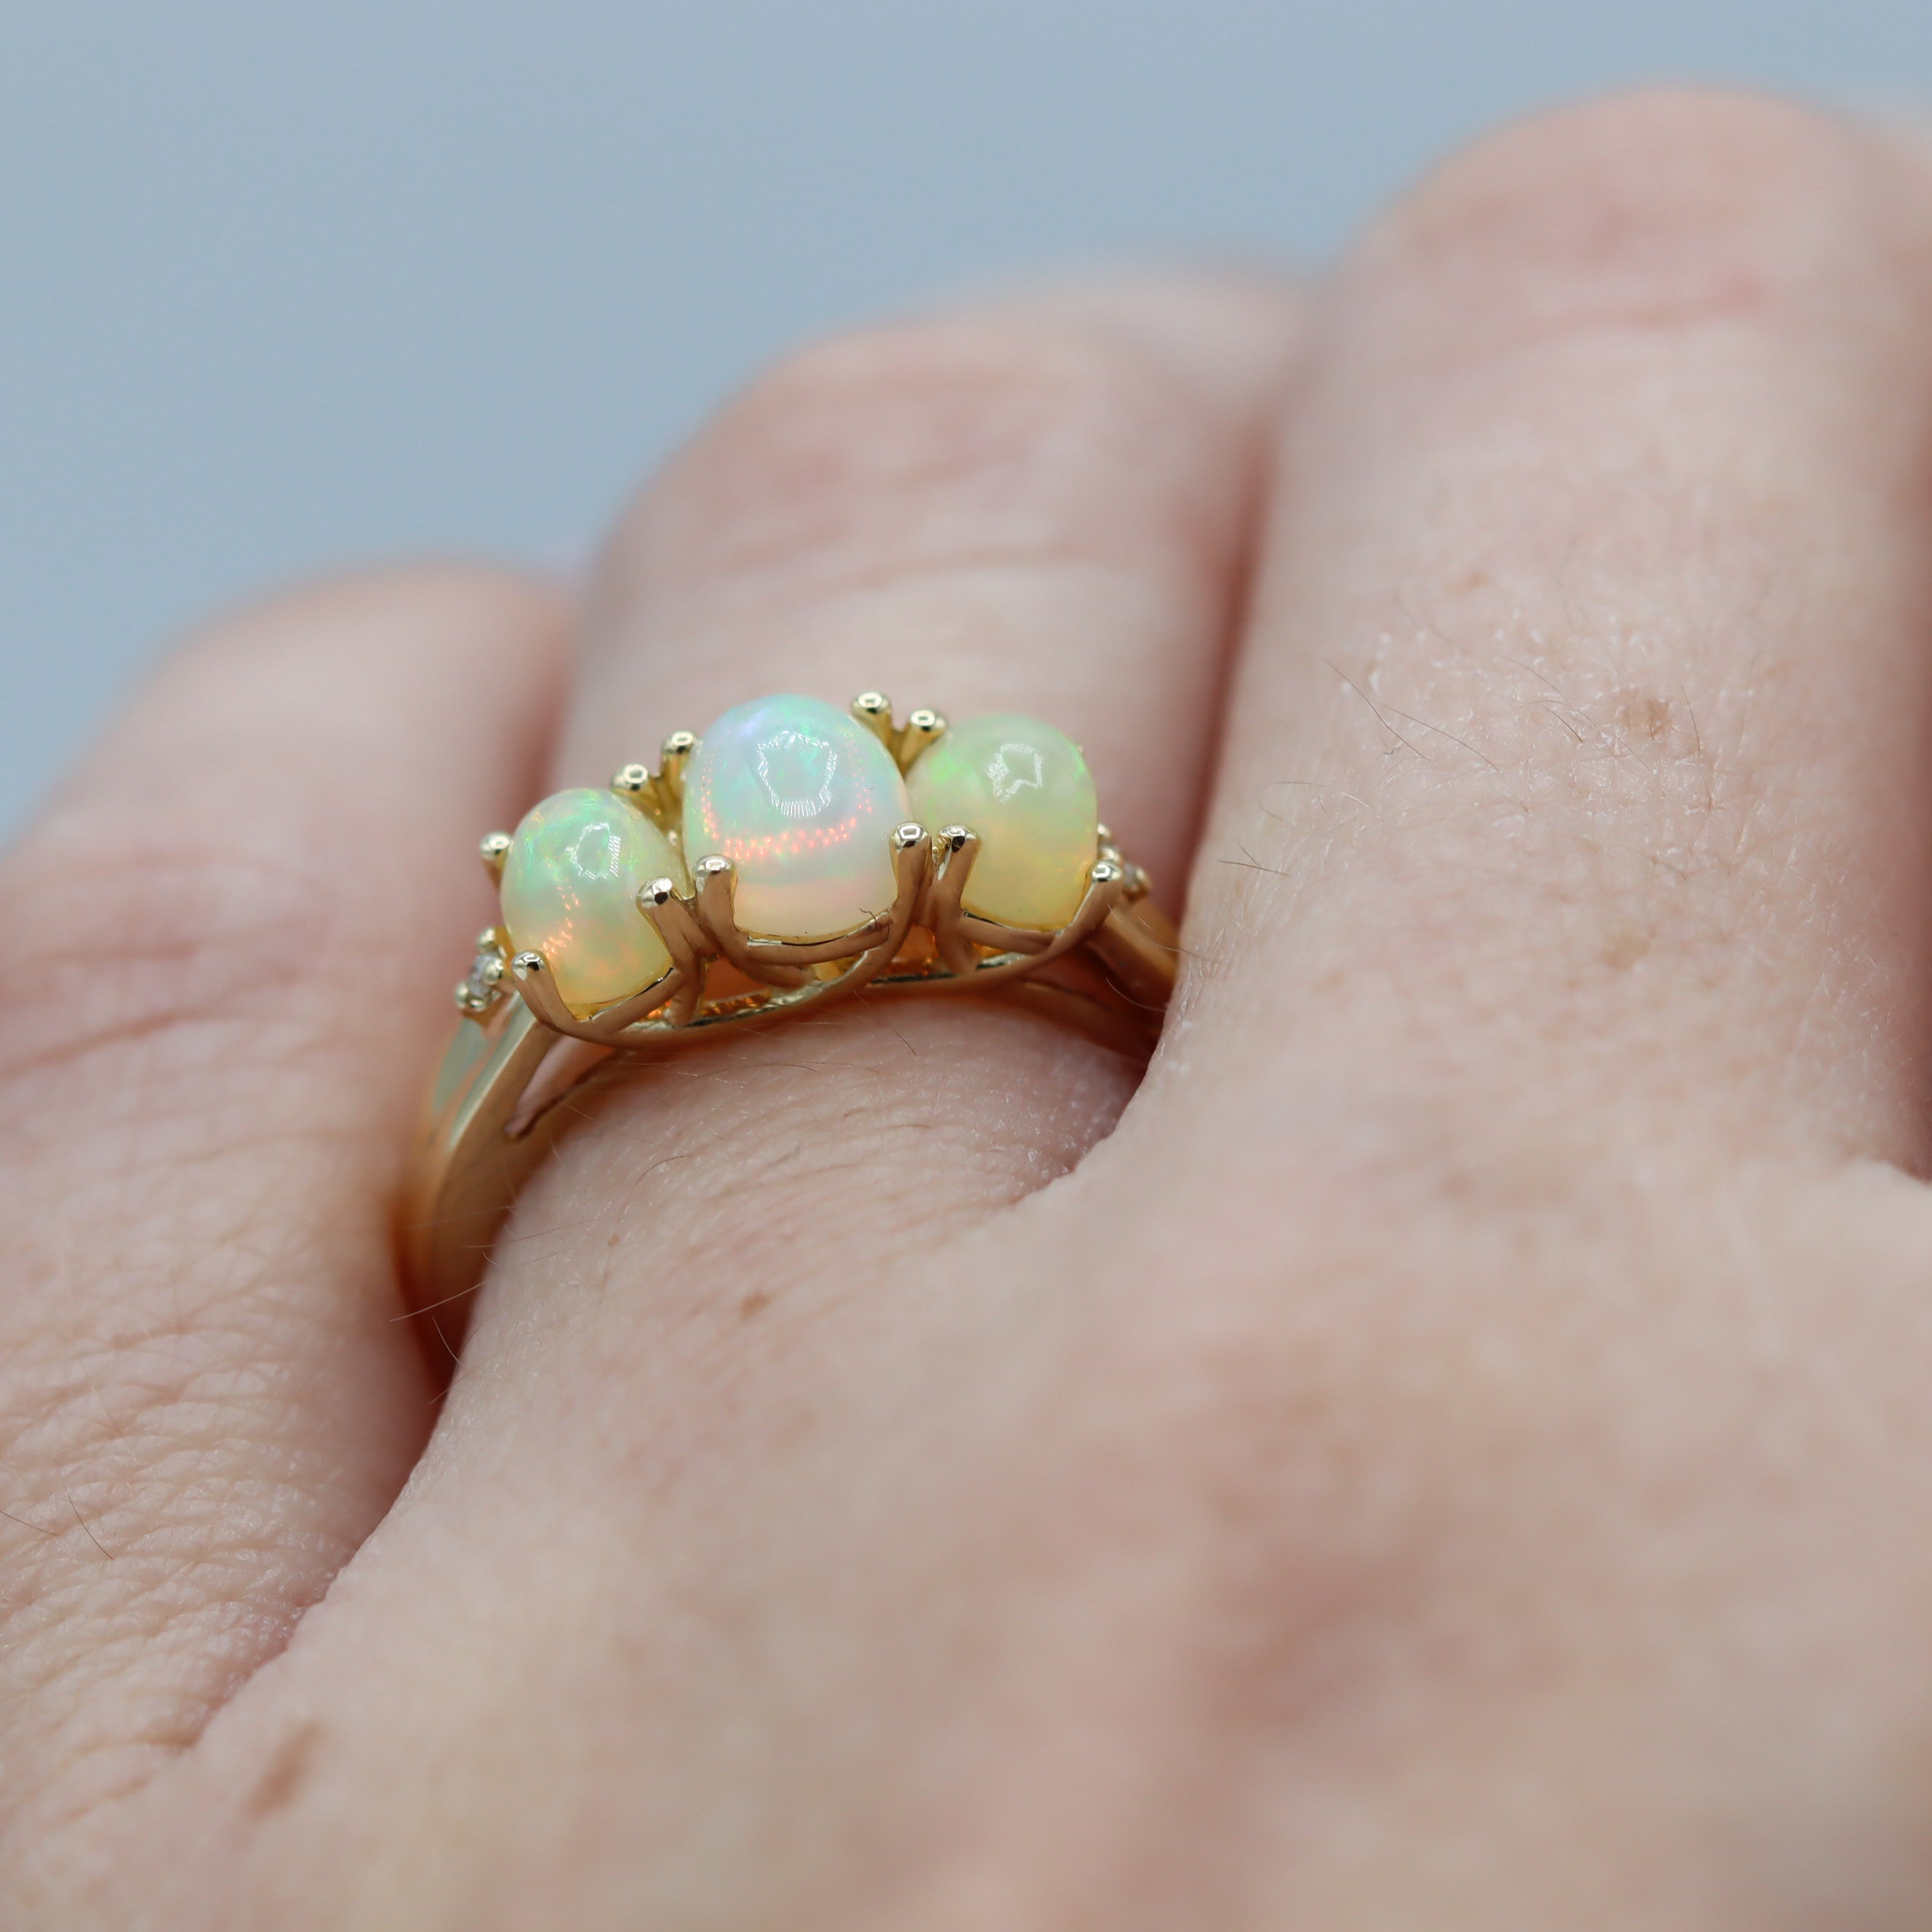 Estate Collection: 10K Yellow Gold 3-Stone Opal Ring